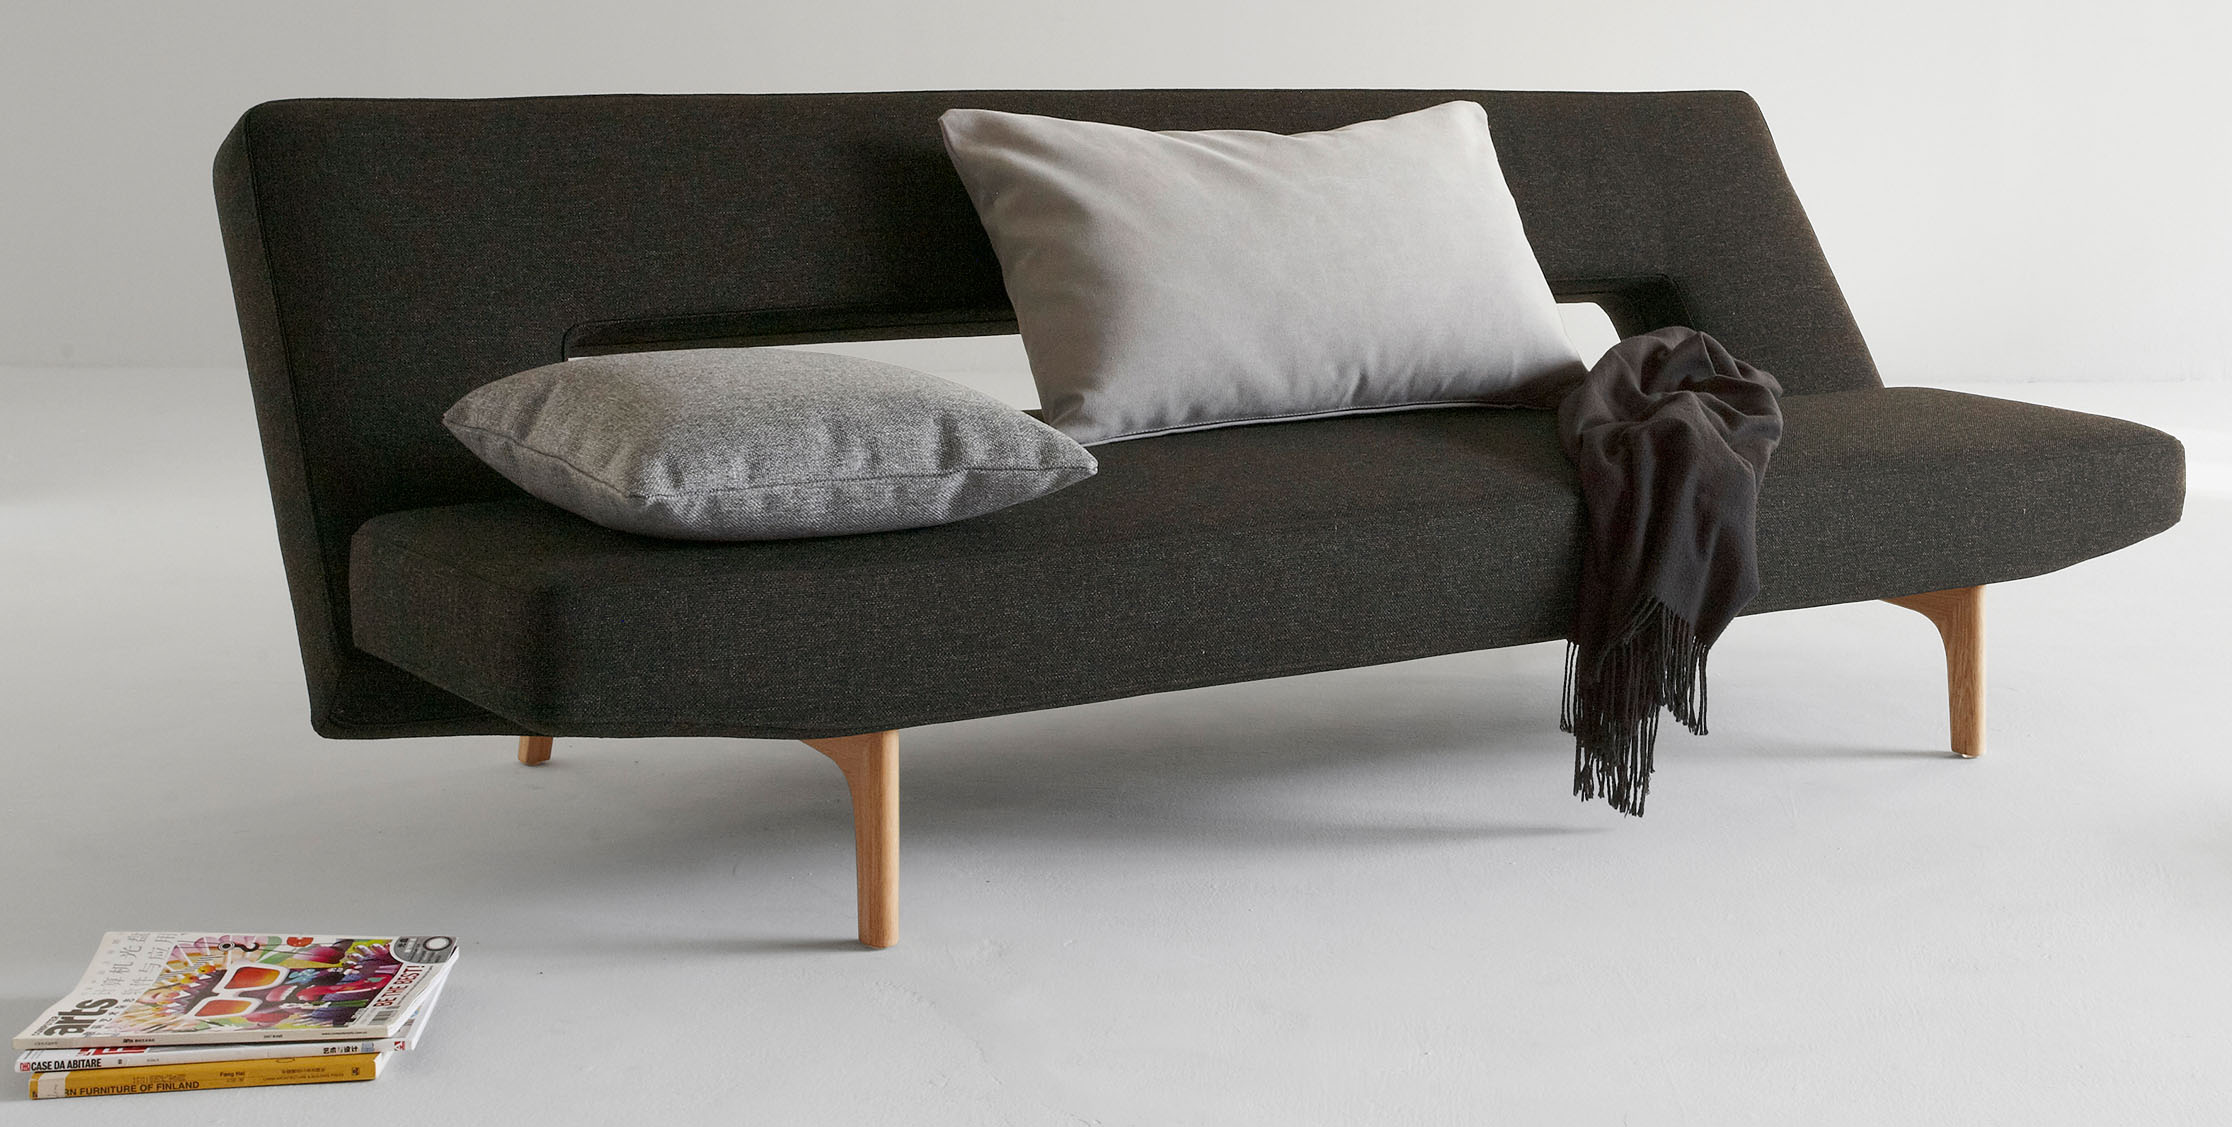 Contemporary Dark Brown or Grey Fabric Sofa Bed with Wood Legs - Click Image to Close